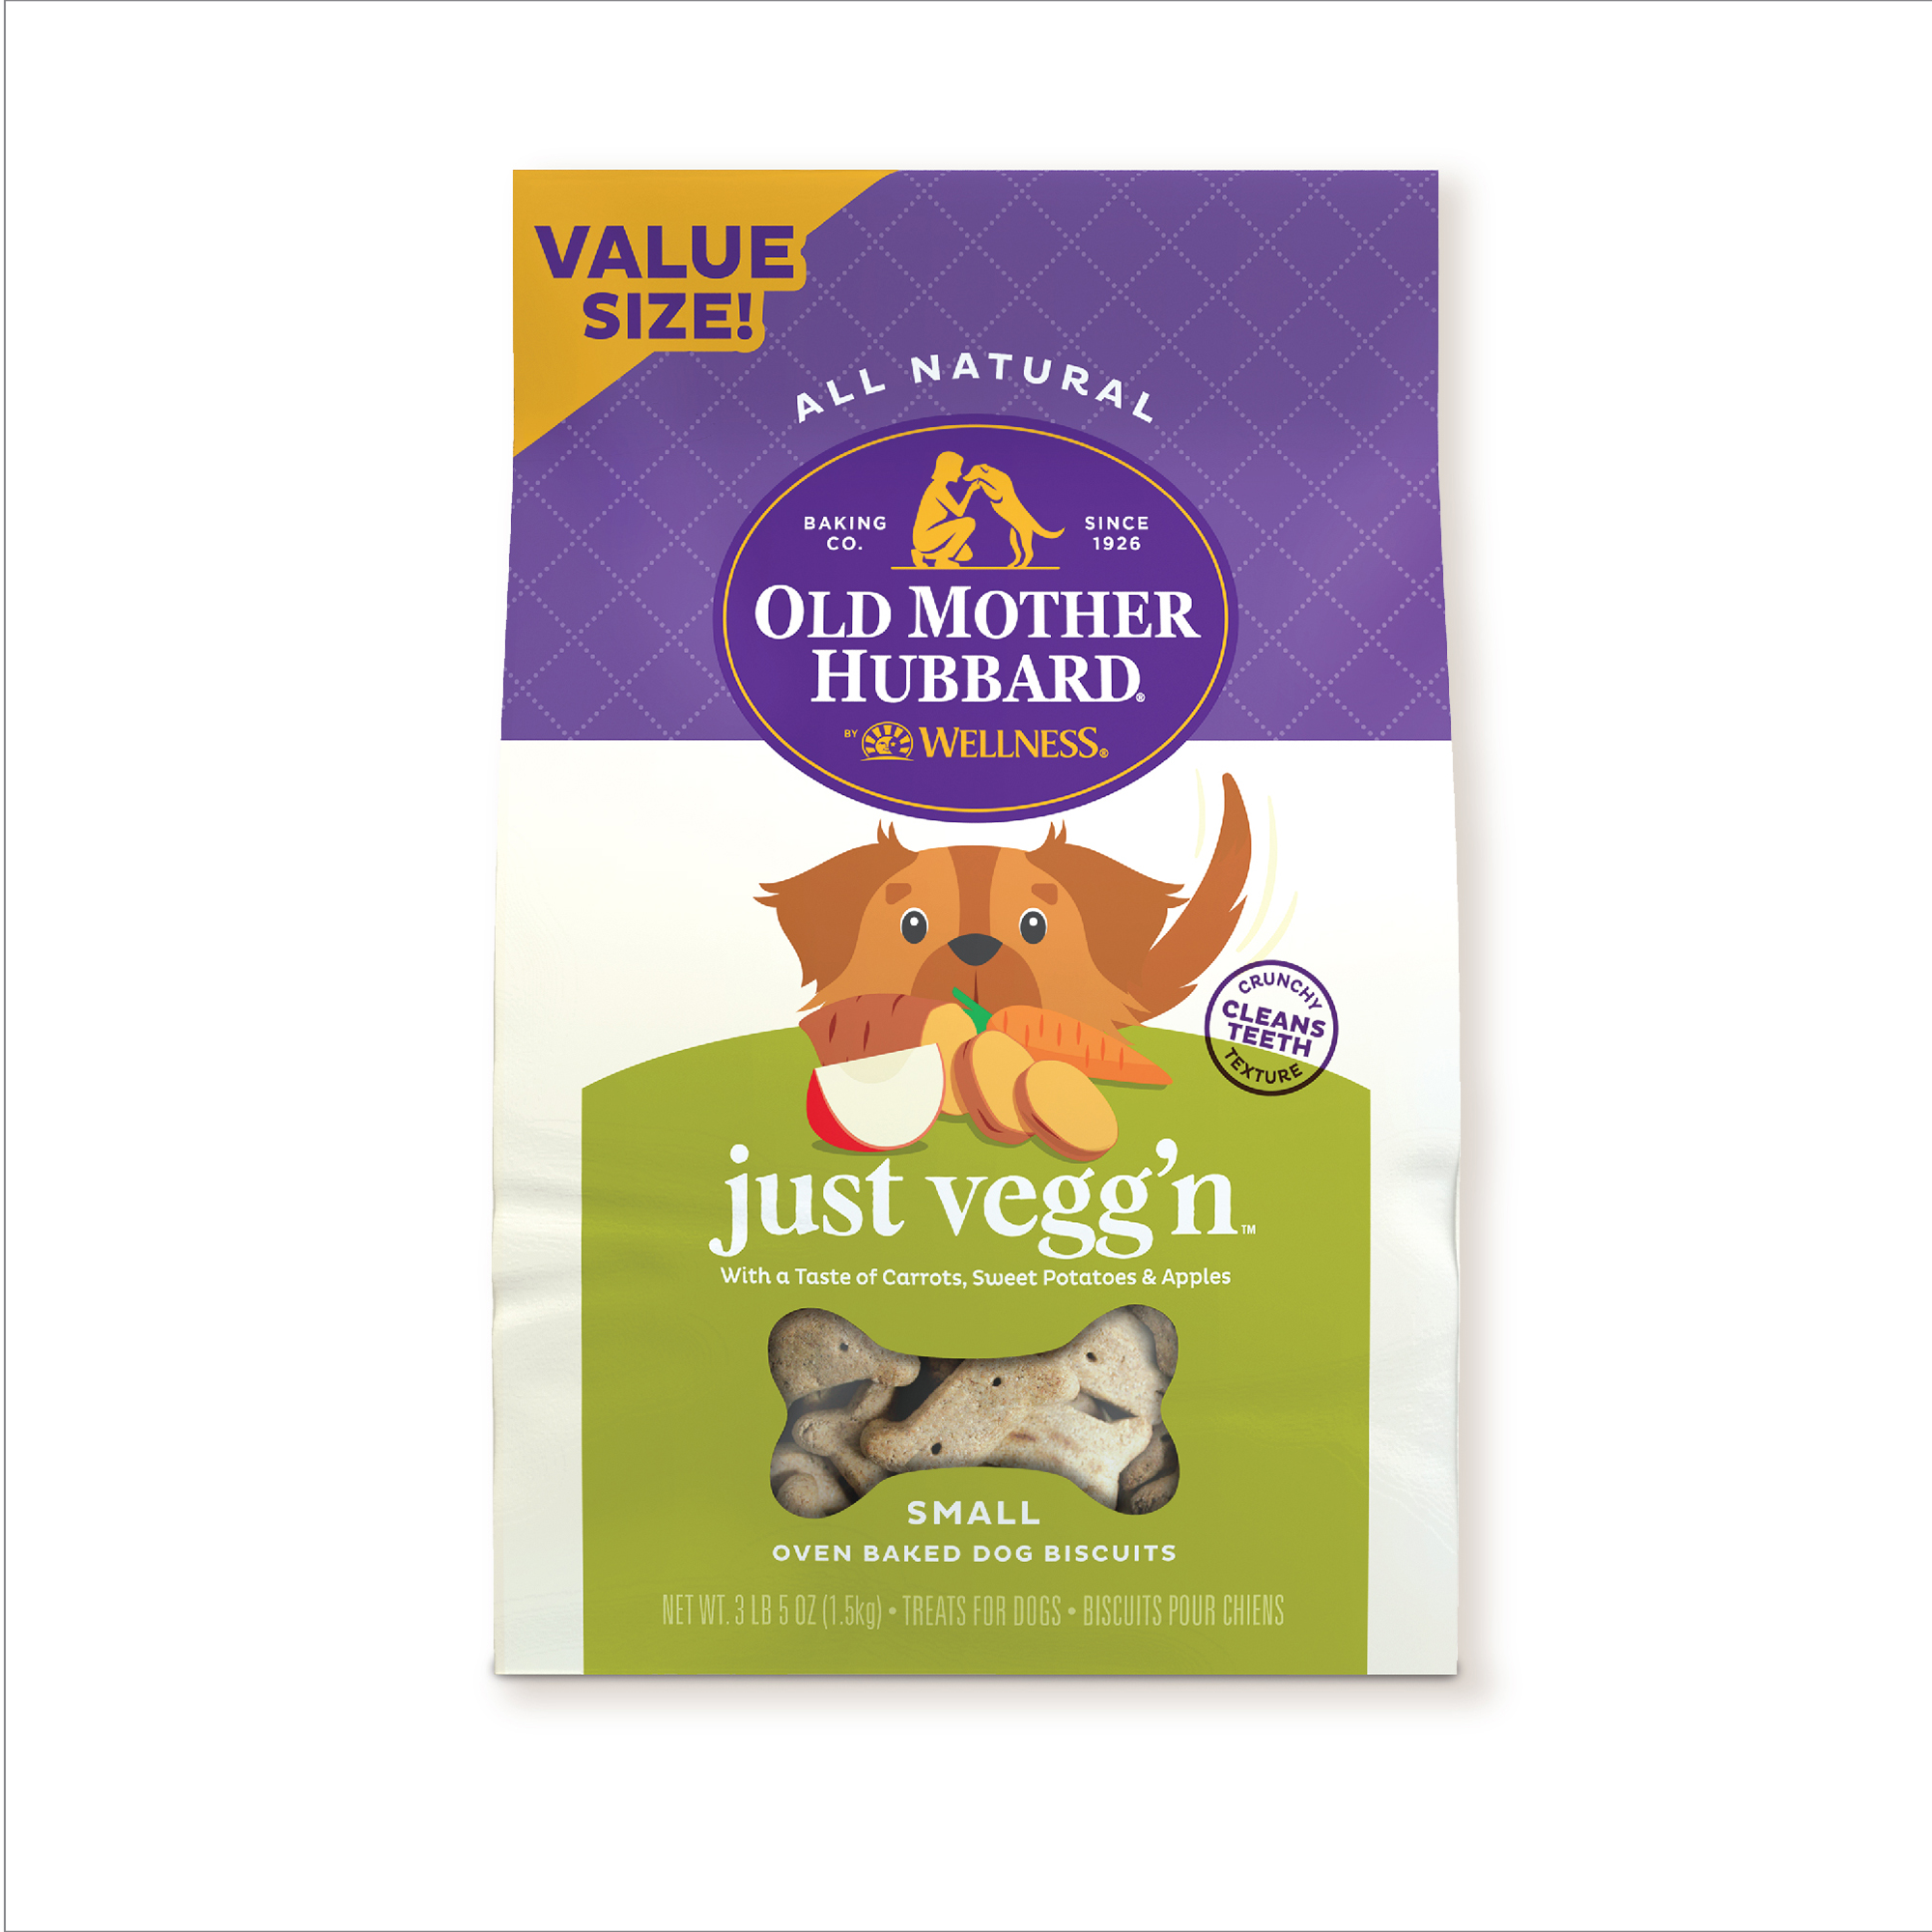 Old Mother Hubbard by Wellness Classic Just Vegg'N Natural Small Biscuits Dog Treats, 3.3 lb bag - image 1 of 11